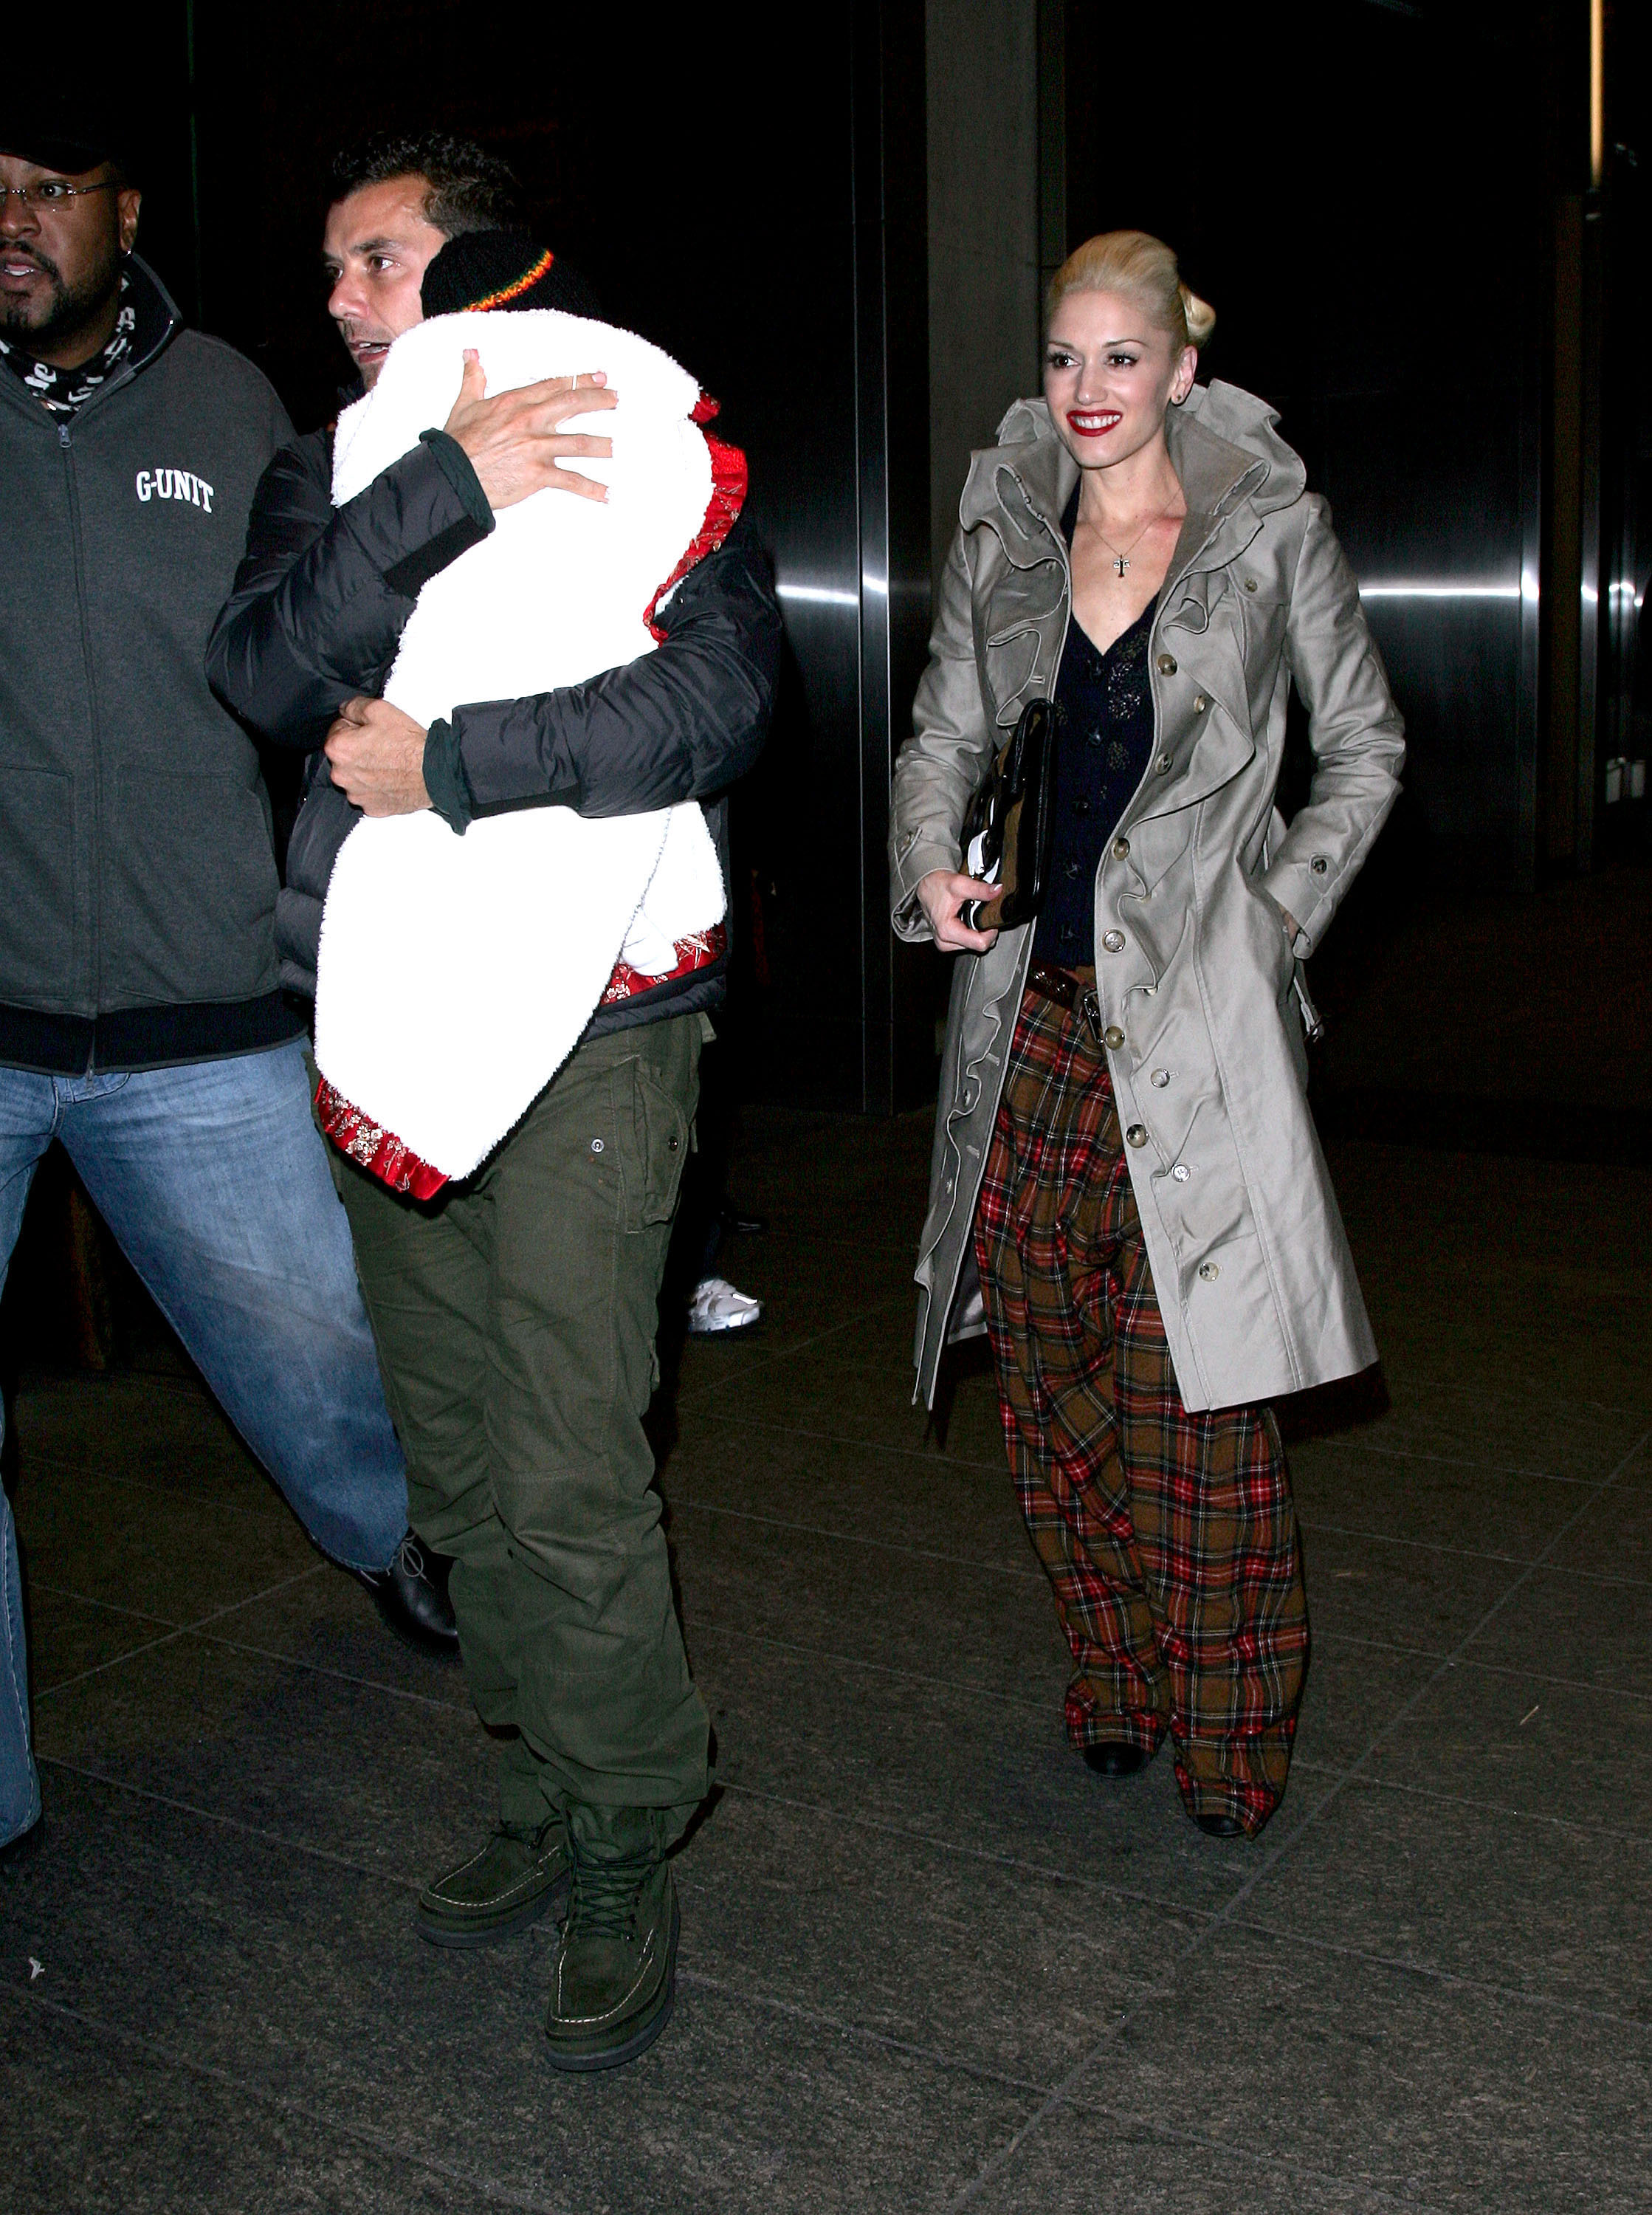 Gavin Rossdale and Gwen Stefani with their son Kingston Rossdale seen on December 7, 2006 in New York City | Source: Getty Images